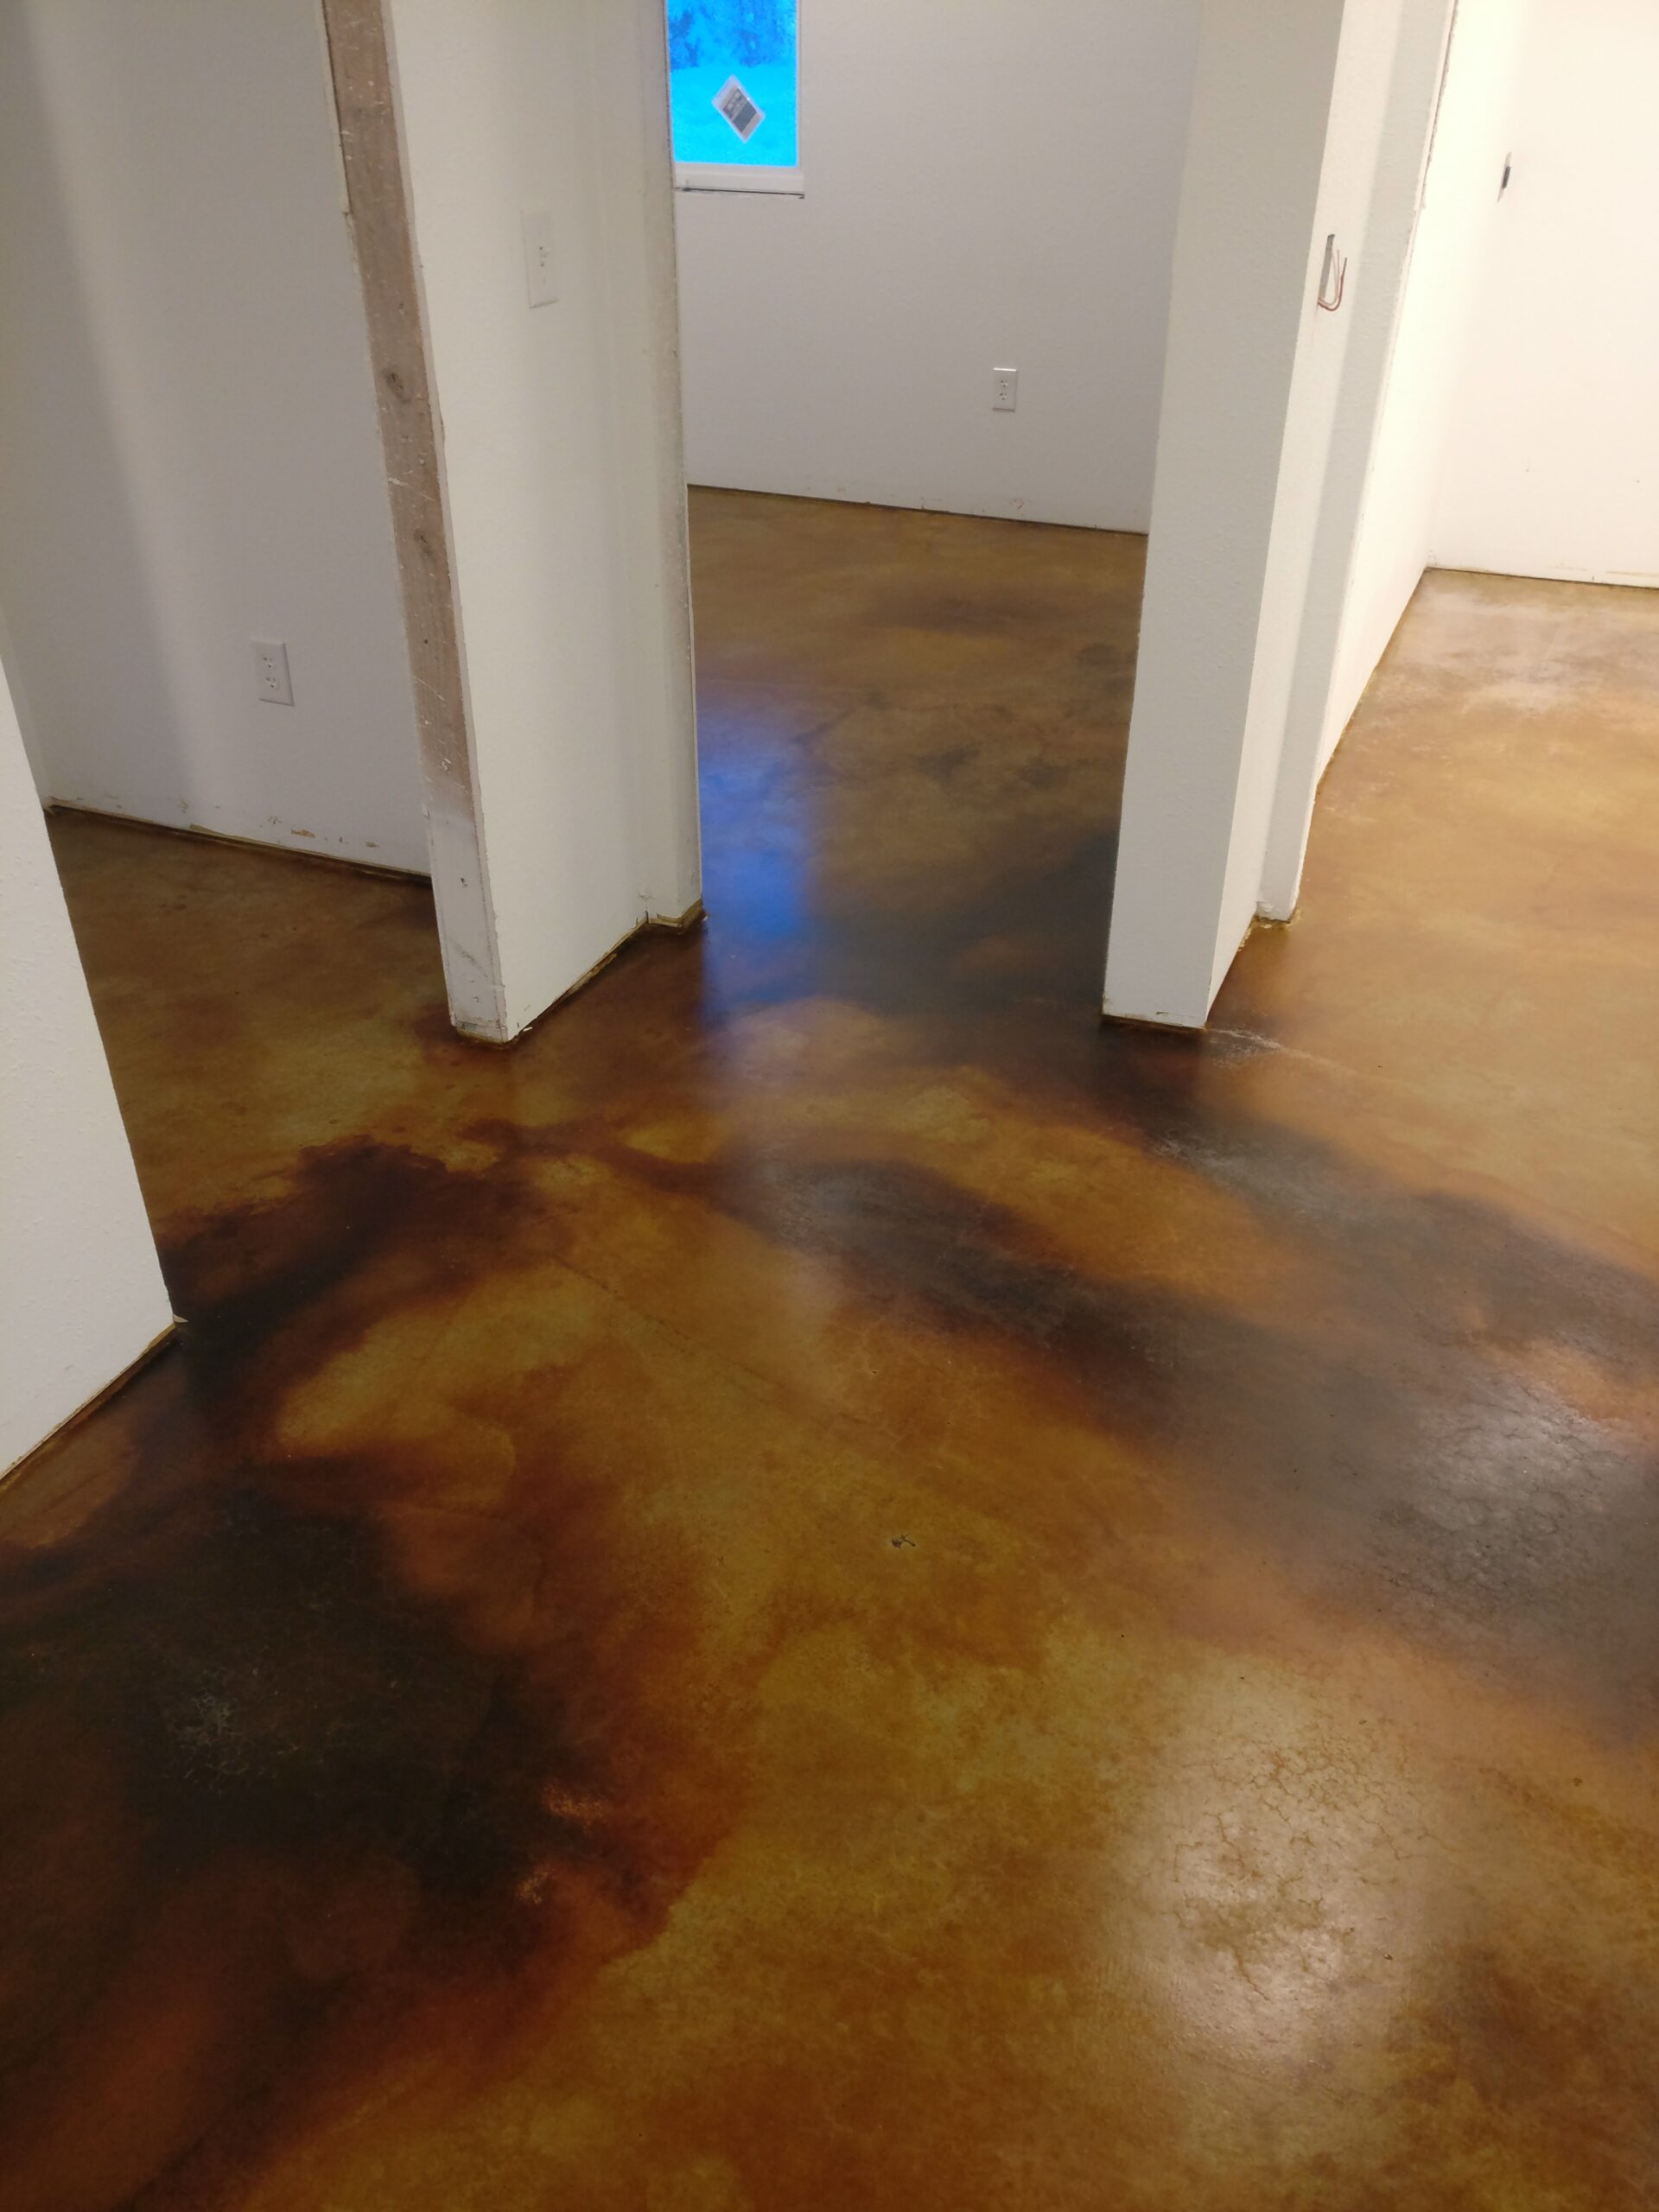 Malayan Buff, Coffee Brown, Desert Amber EverStain Acid Stains on Concrete Floor